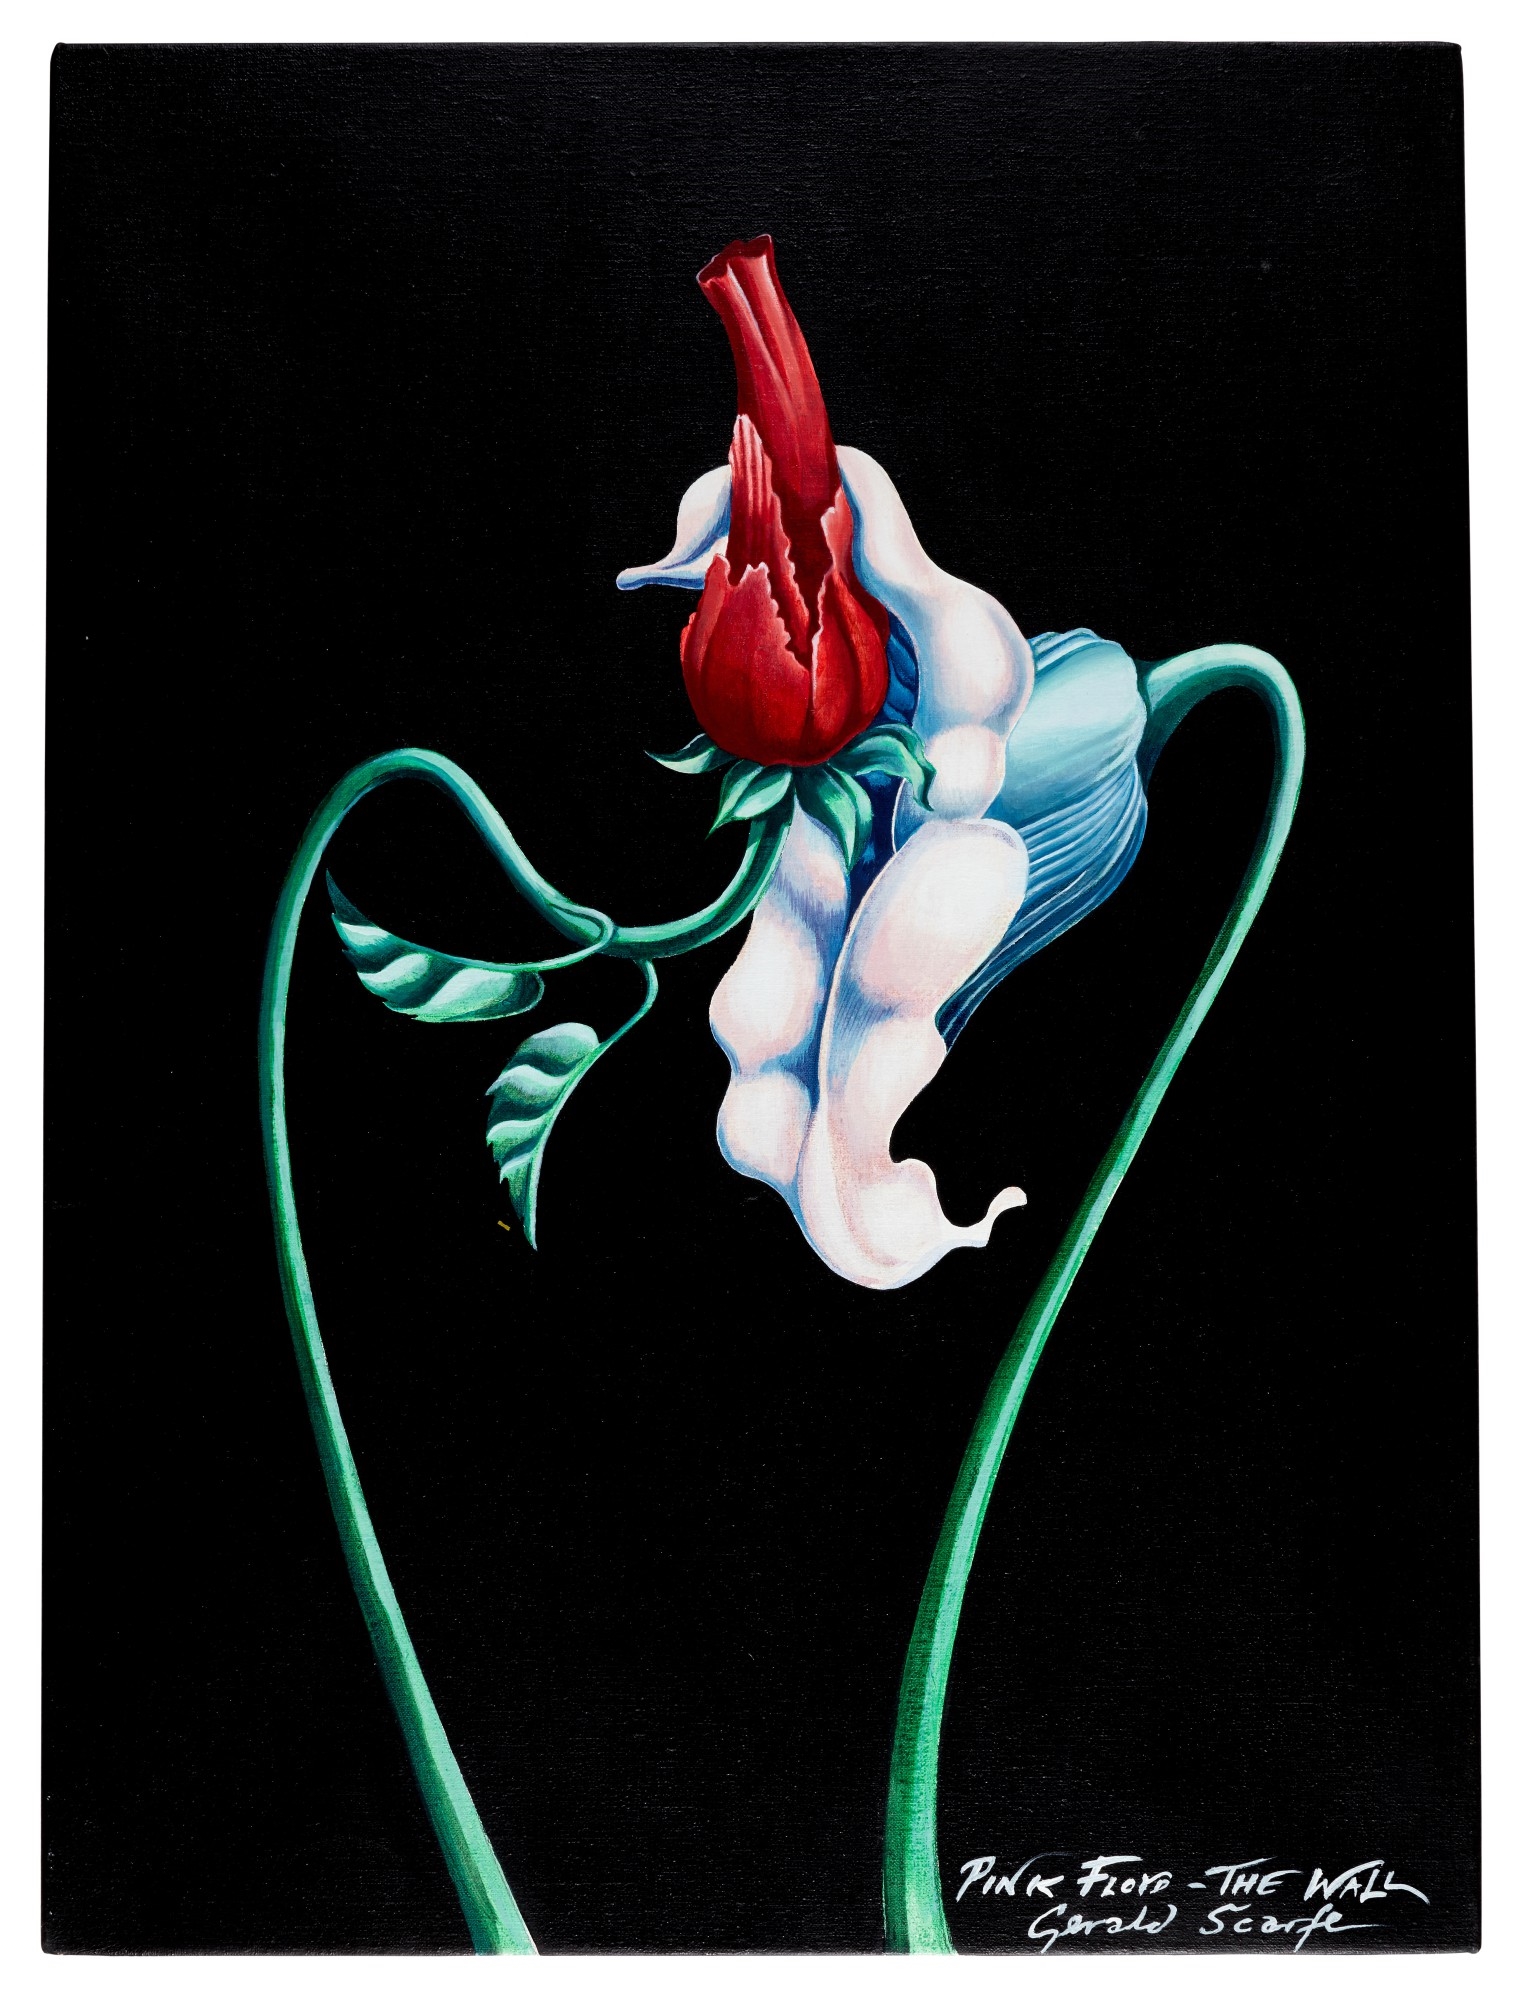 Gerald Scarfe | Pink Floyd – The Wall | The Flowers | MutualArt